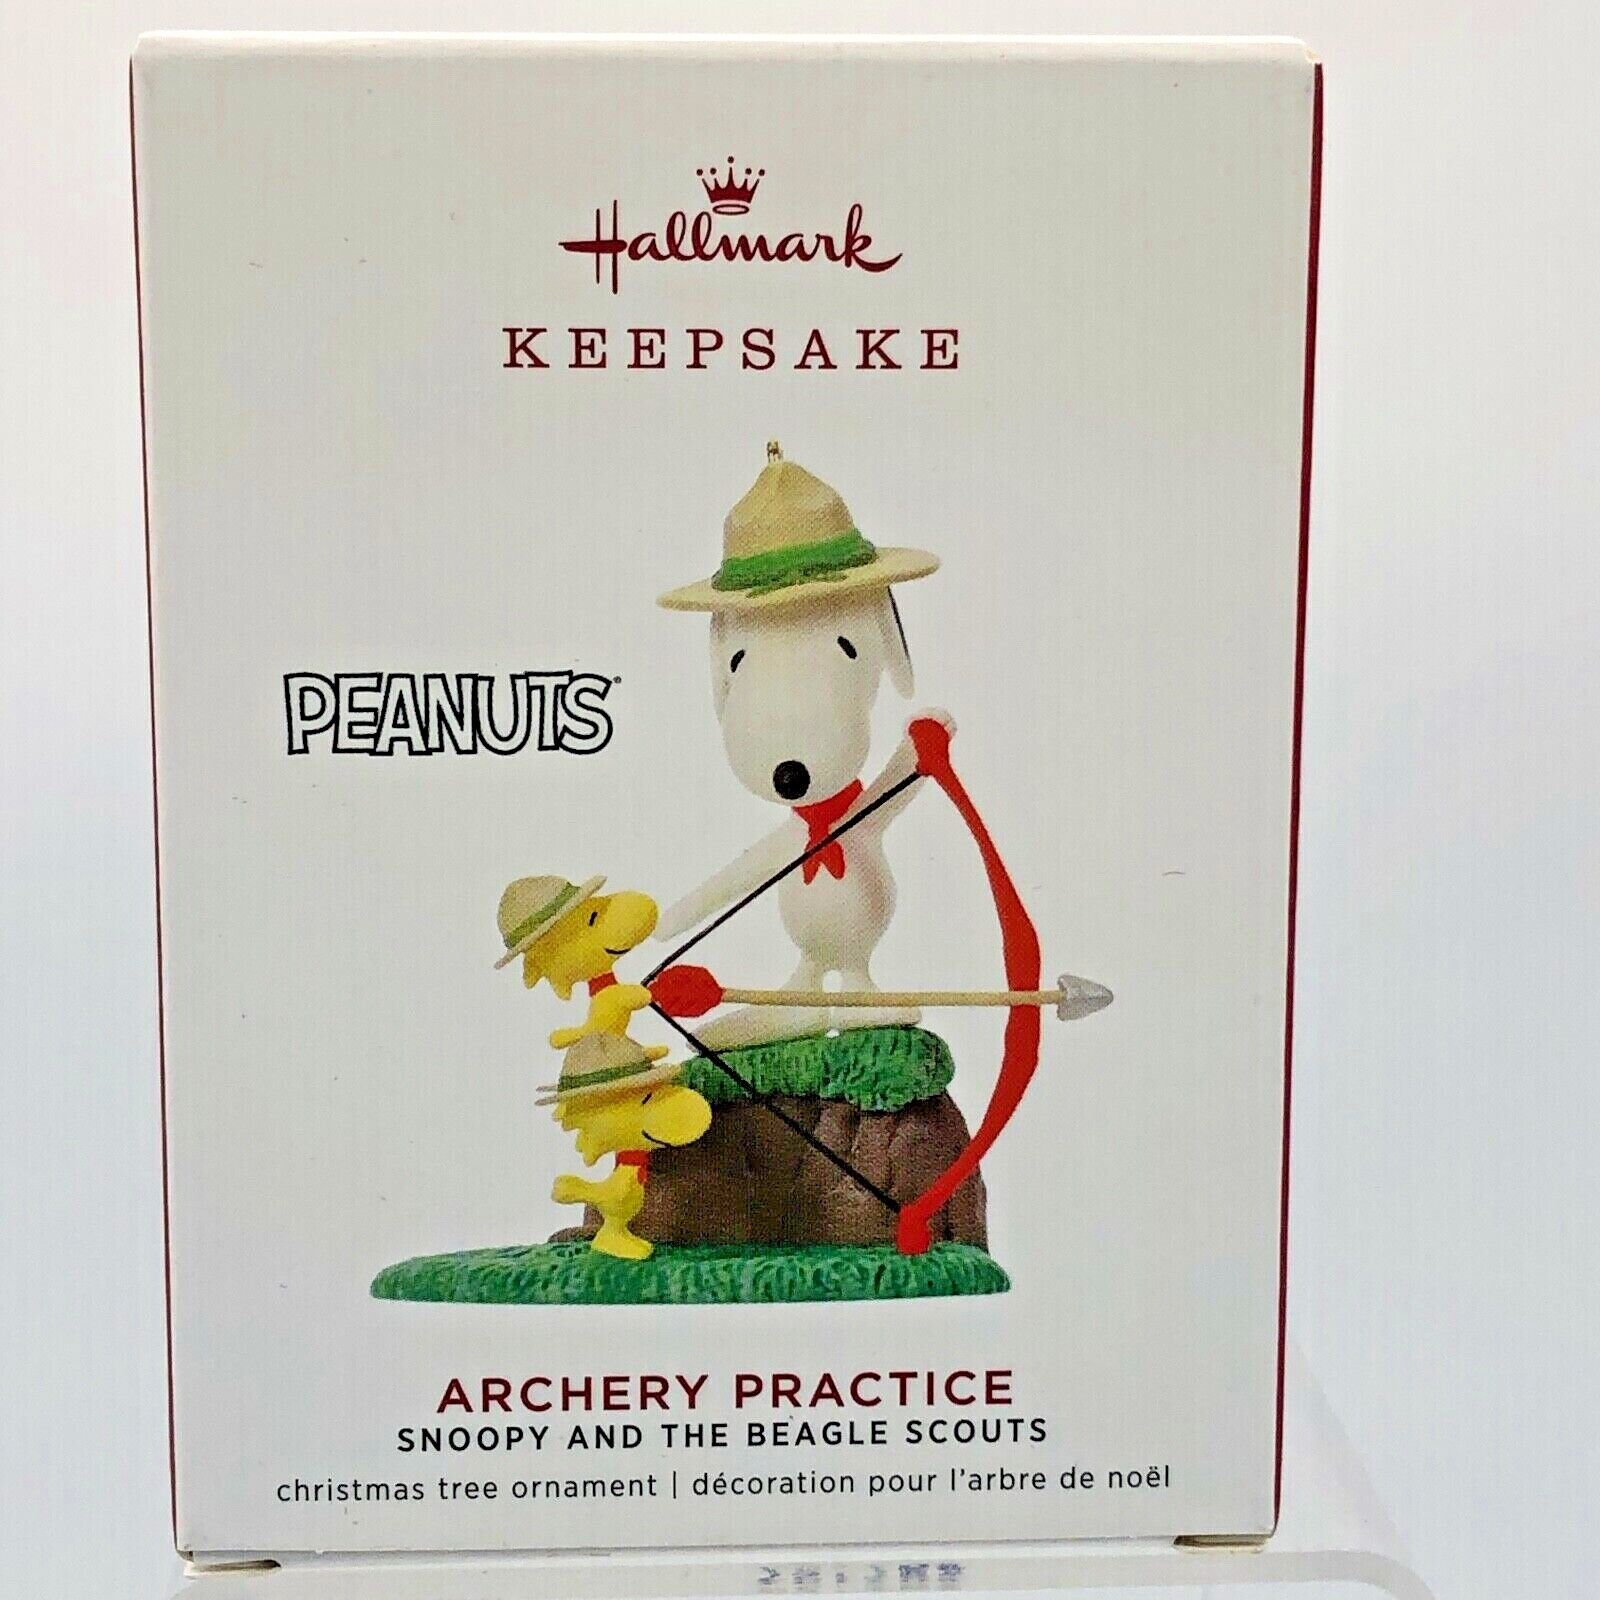 Hallmark Ornament-2019-Archery Practice-SNOOPY and the Beagle Scouts-PEANUTS